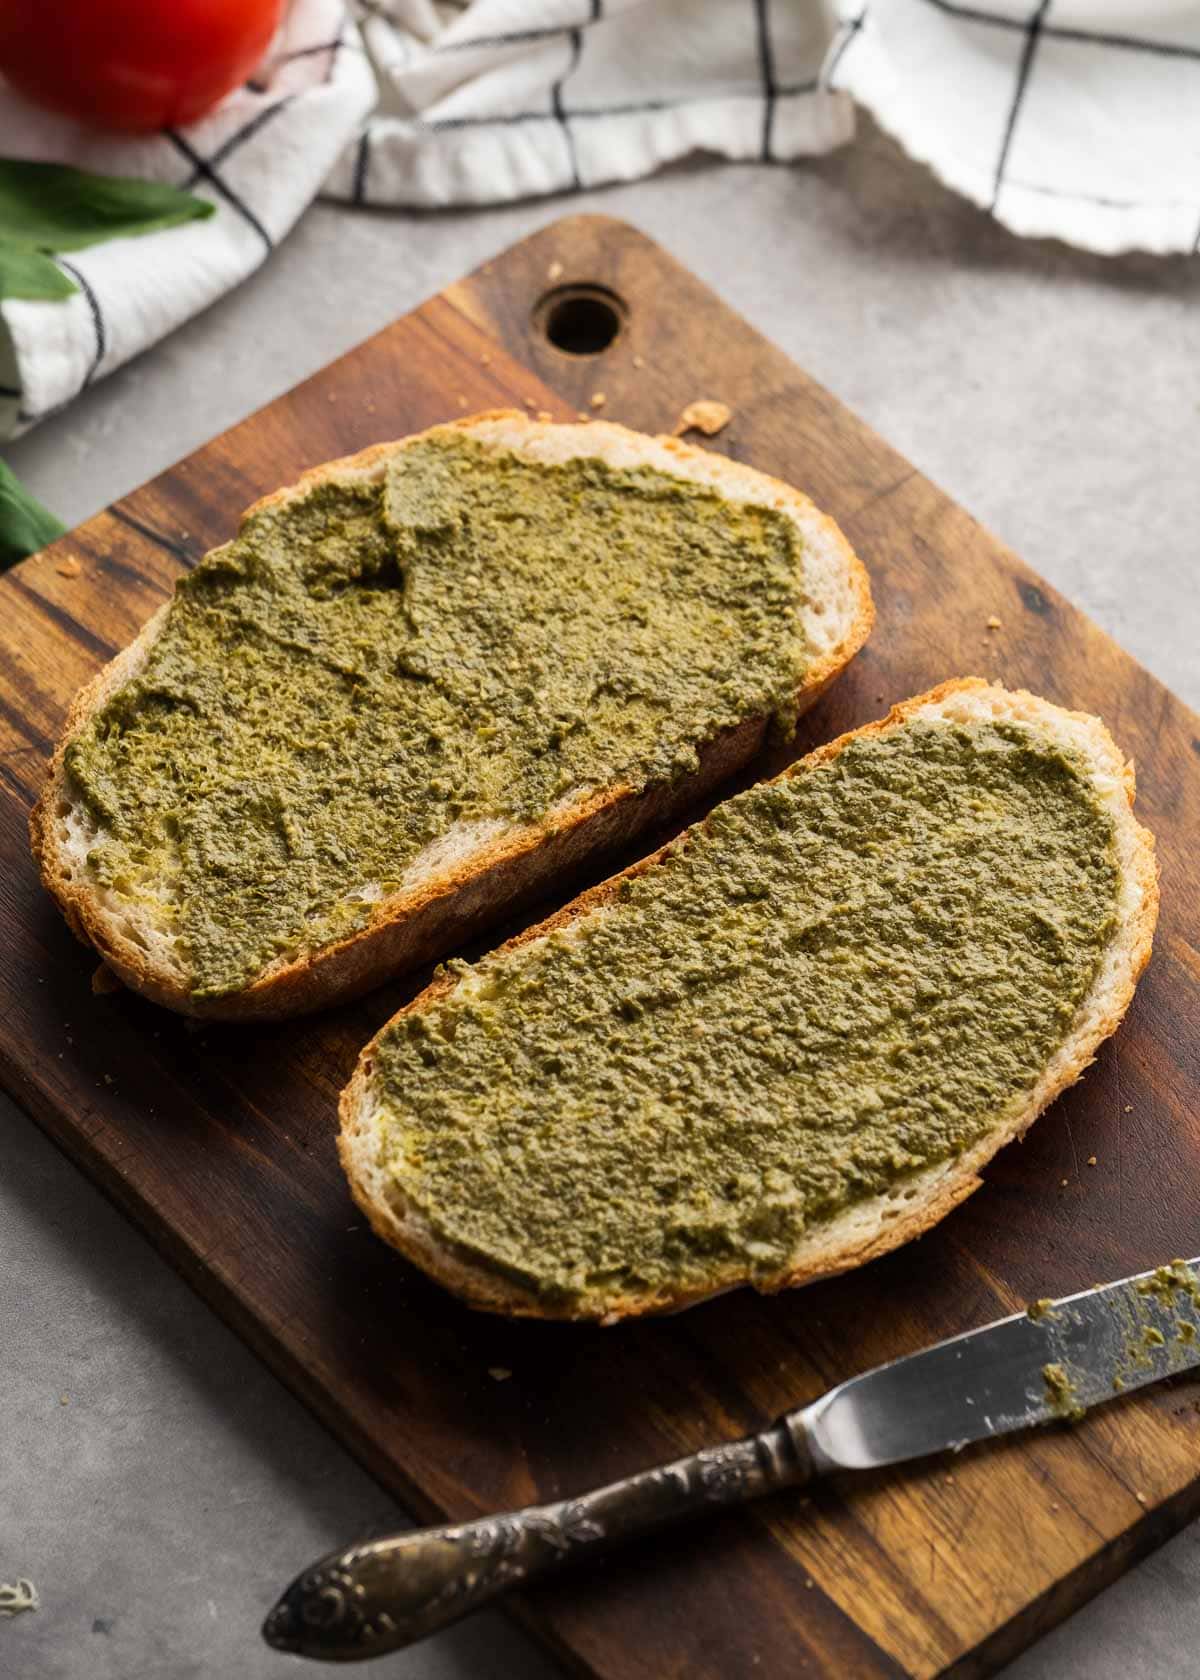 pesto being added to sliced bread